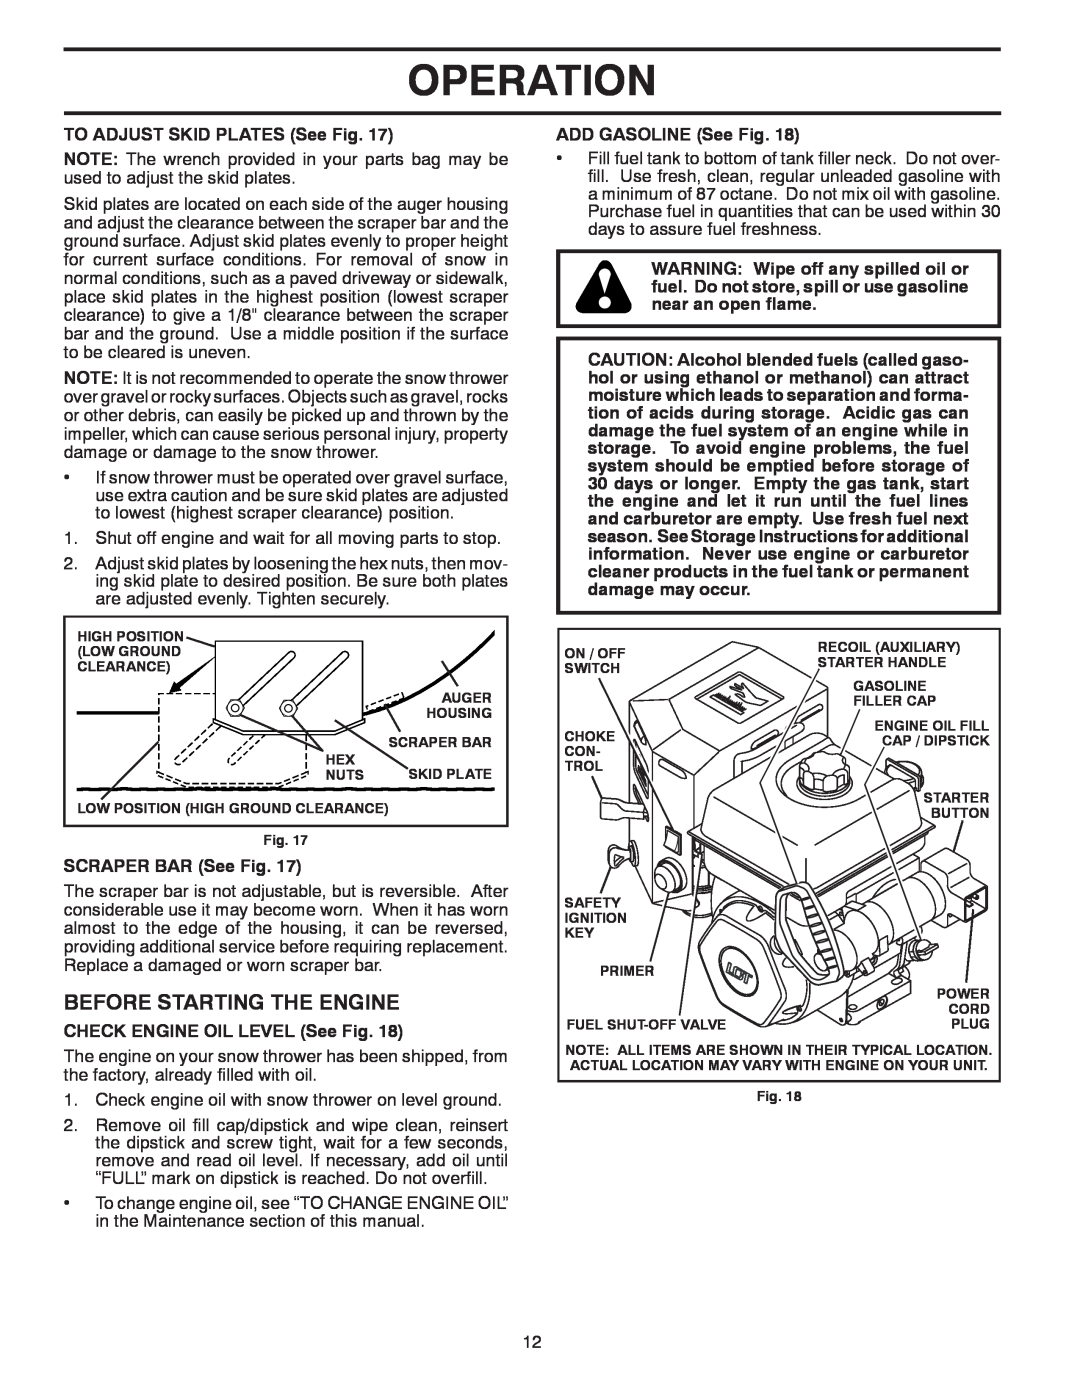 Poulan 435551 owner manual Before Starting The Engine, Operation, TO ADJUST SKID PLATES See Fig, SCRAPER BAR See Fig 